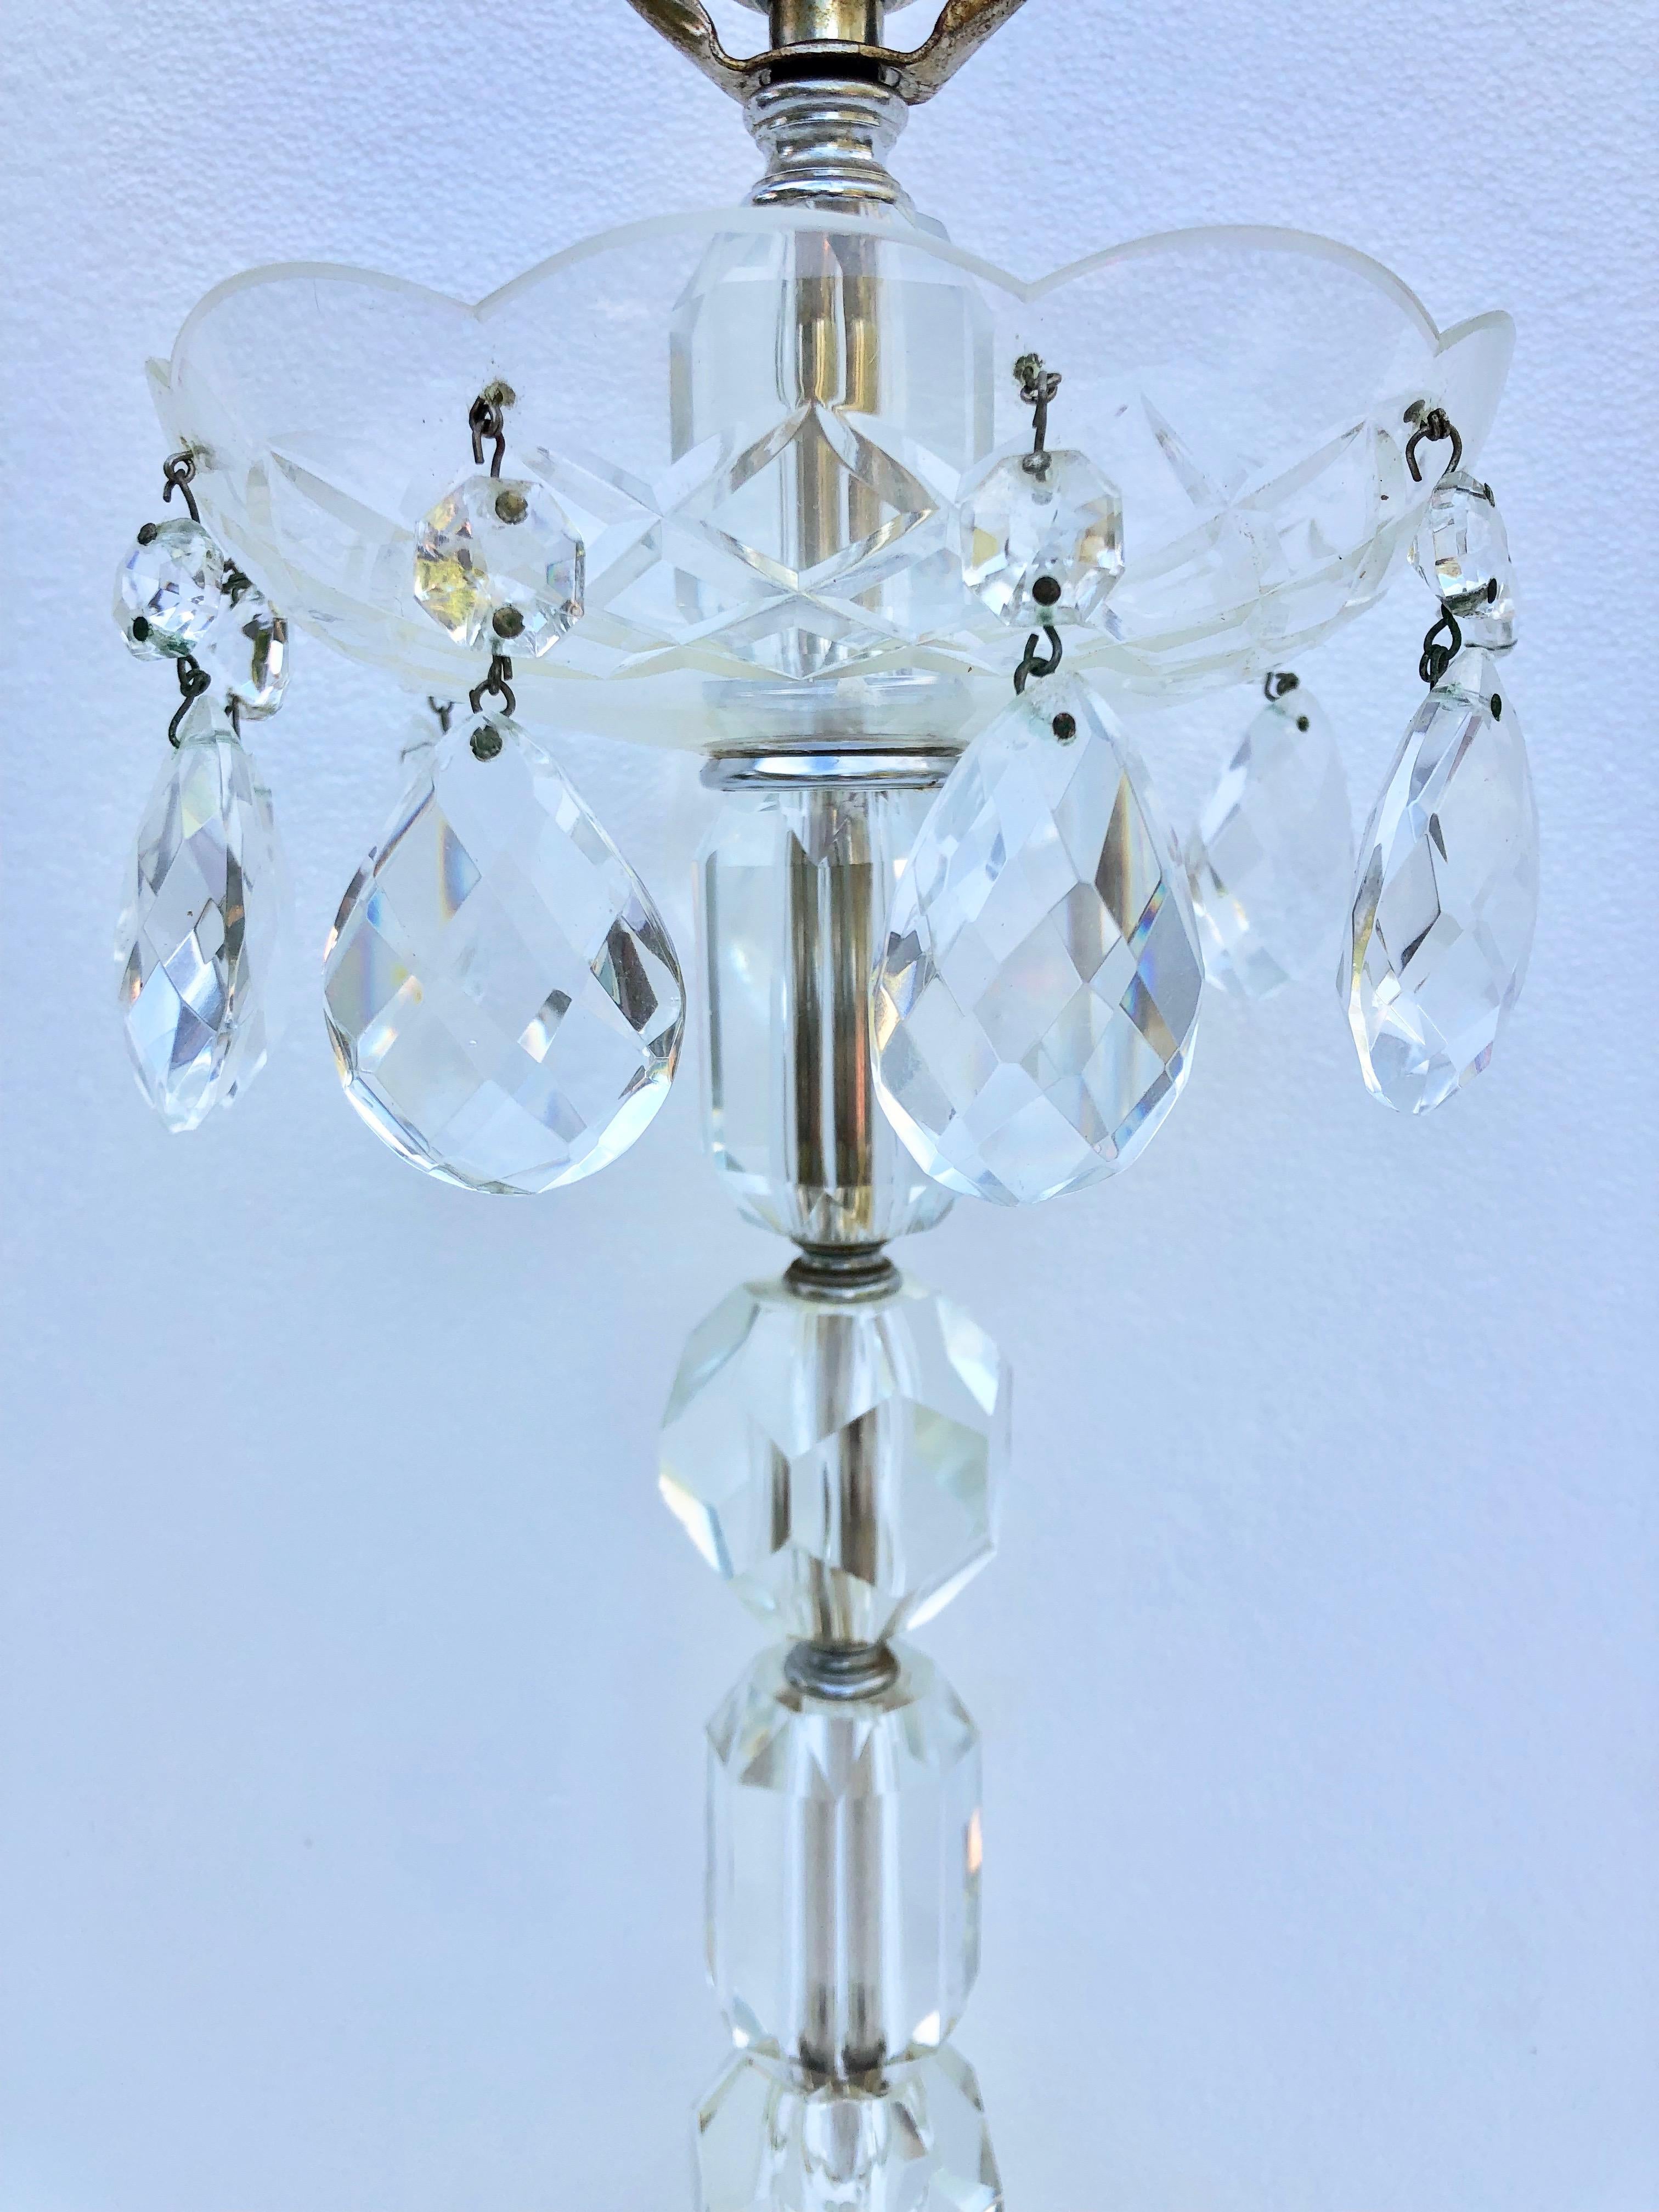 vintage table lamp with hanging crystals